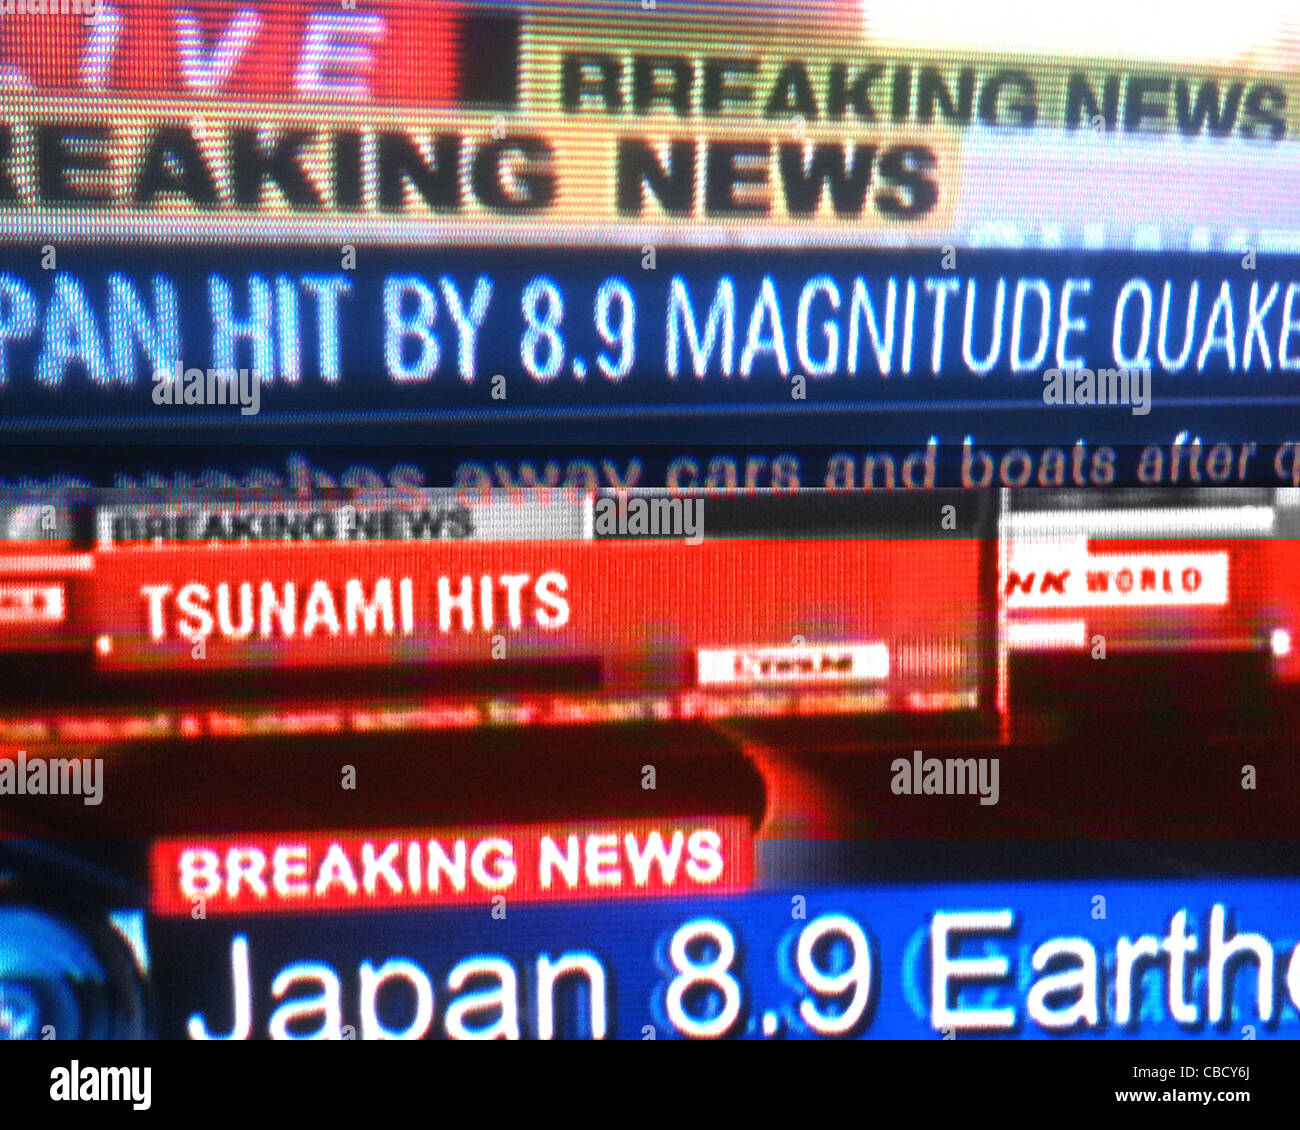 A montage of TV news coverage of the 8.9 magnitude earthquake in Japan on March 11, 2011. Stock Photo